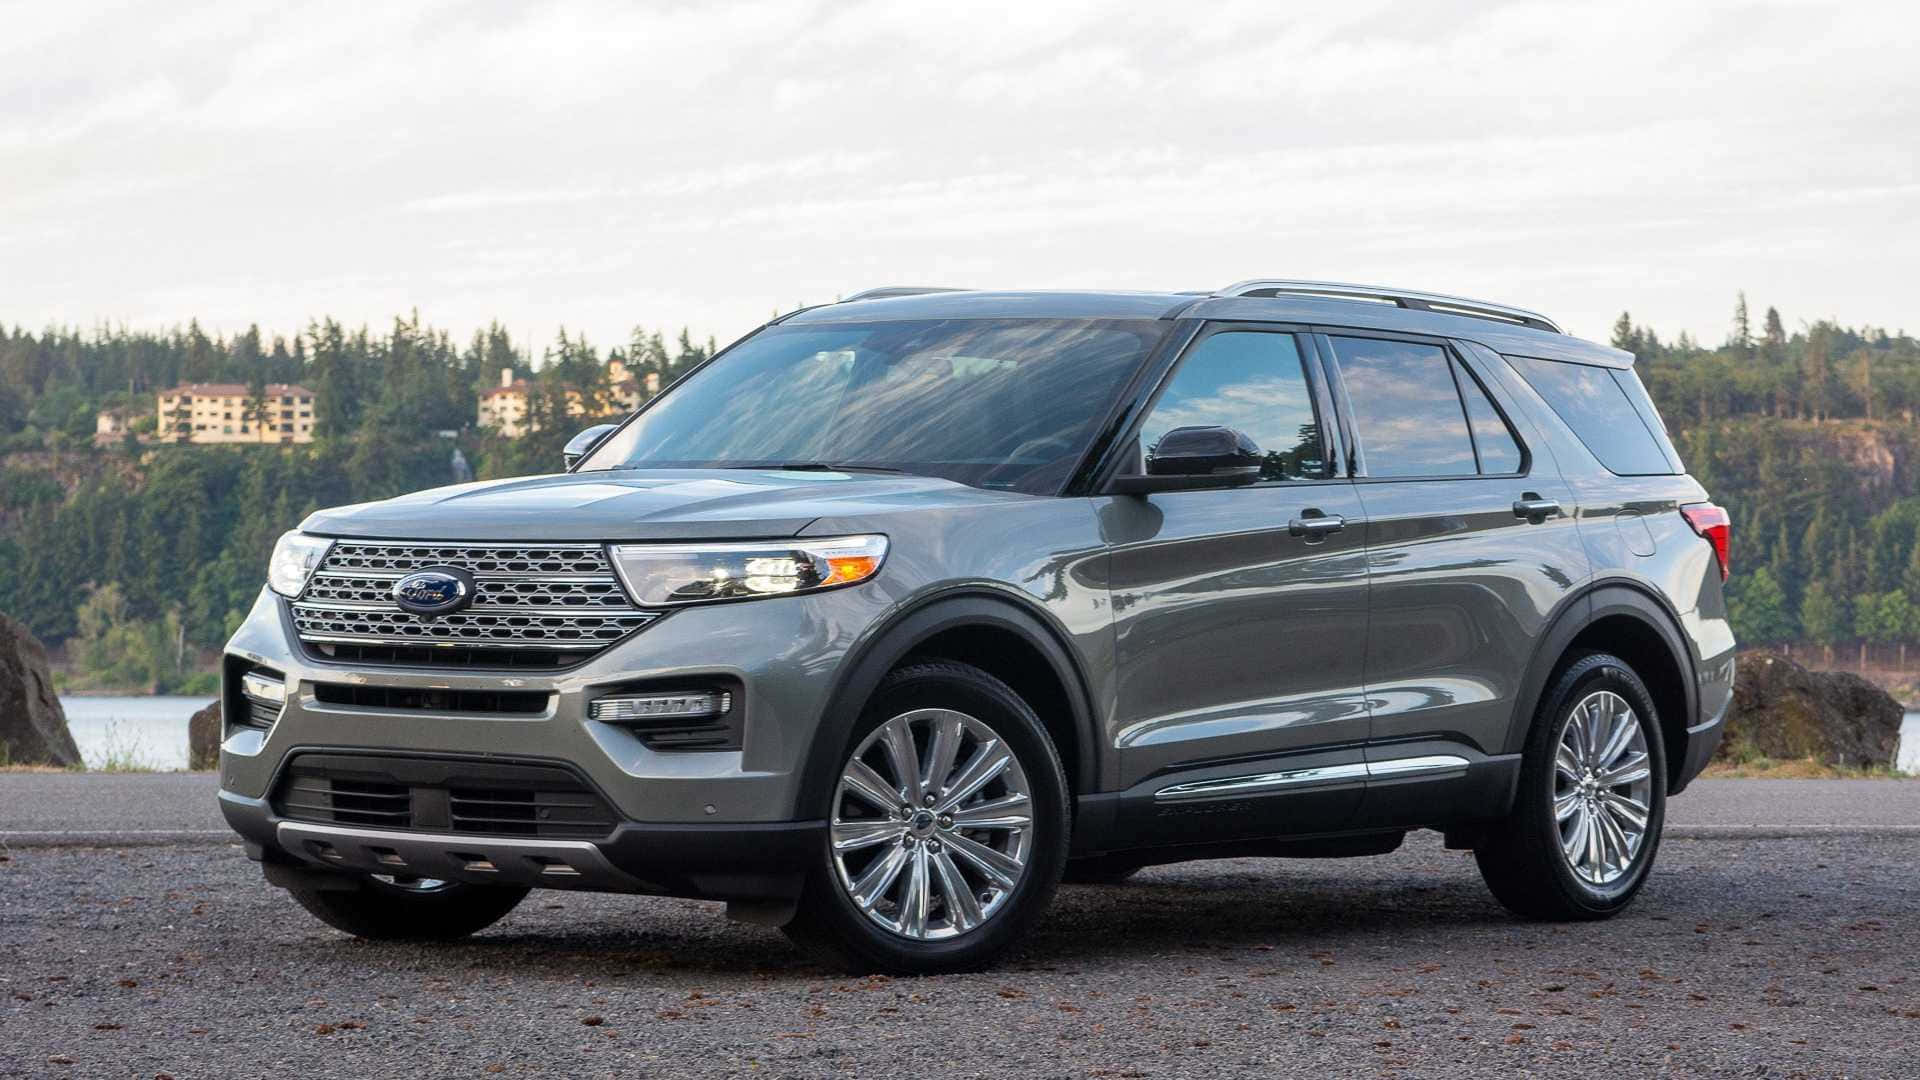 Sleek and Stylish Ford Explorer Cruising on an Open Road Wallpaper